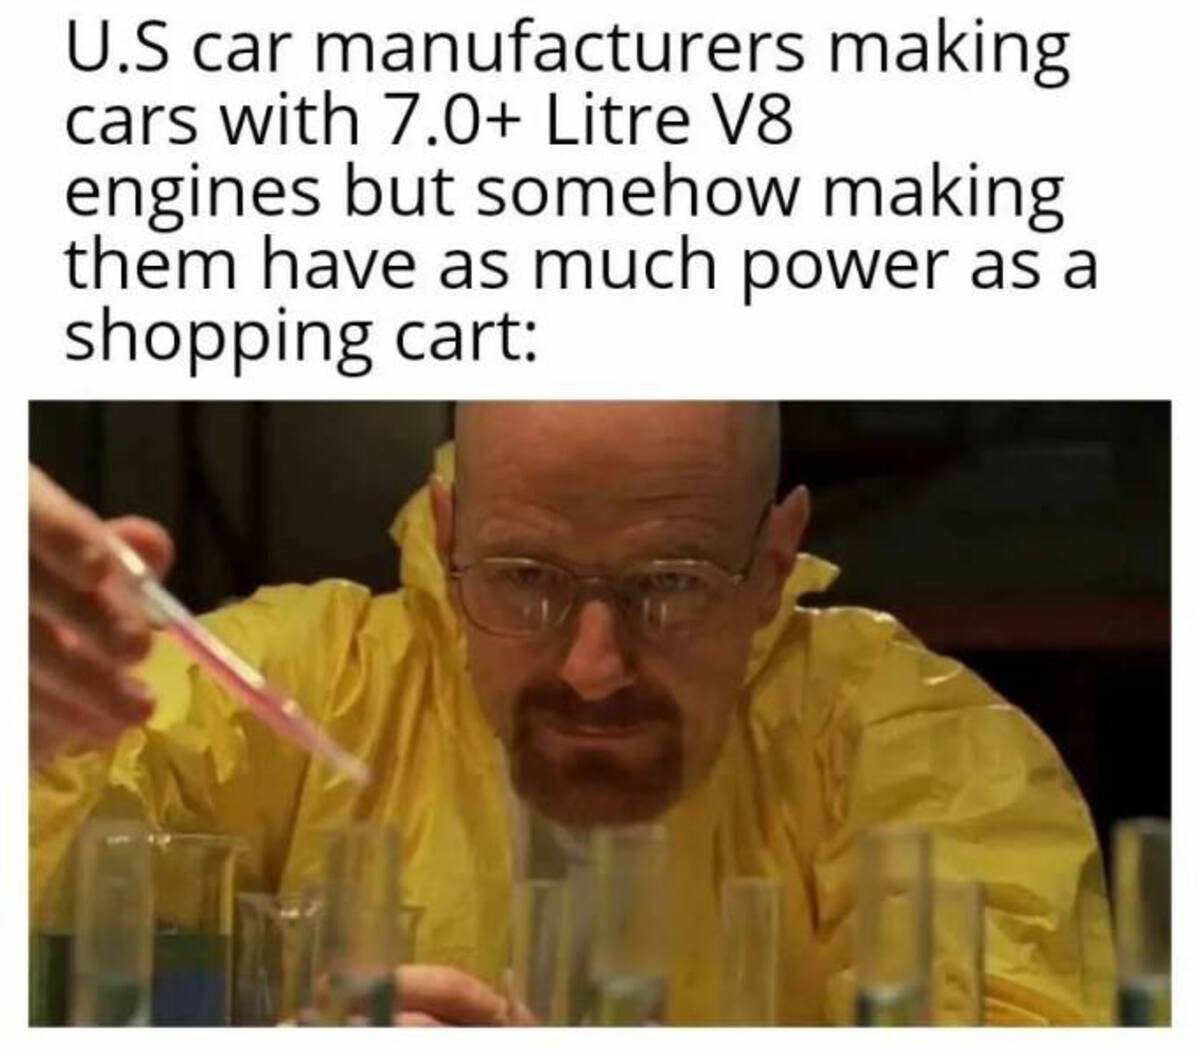 walter white in lab meme - U.S car manufacturers making cars with 7.0 Litre V8 engines but somehow making them have as much power as a shopping cart